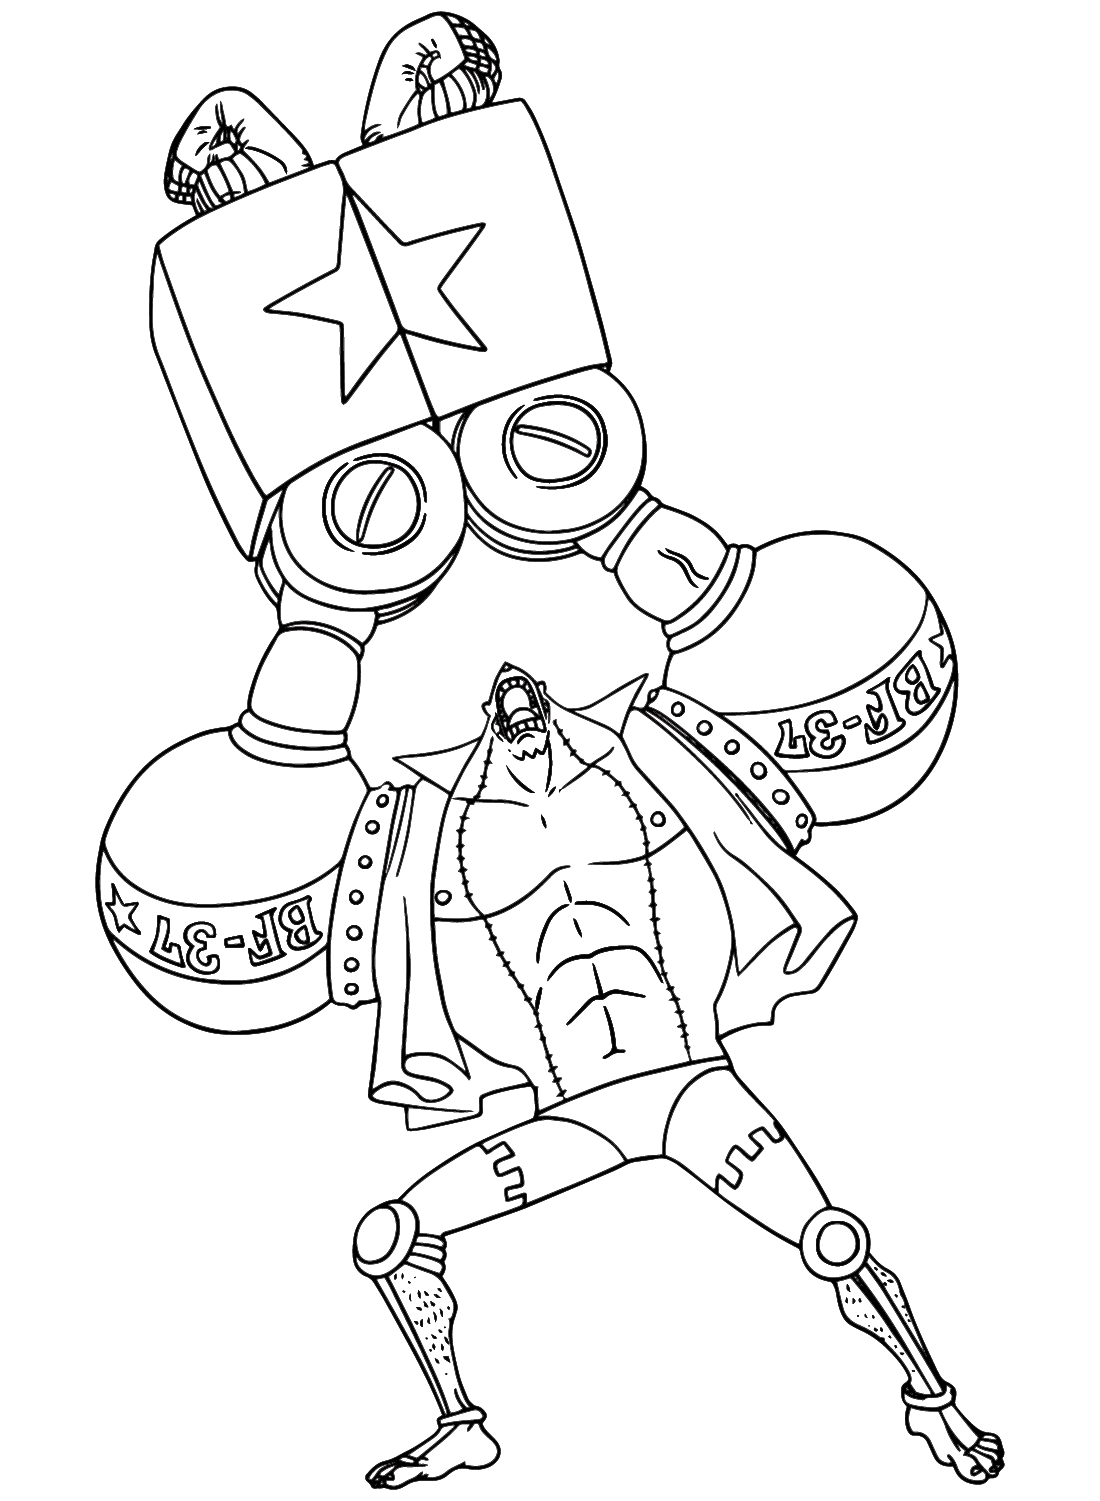 Franky Coloring Page Free from Franky